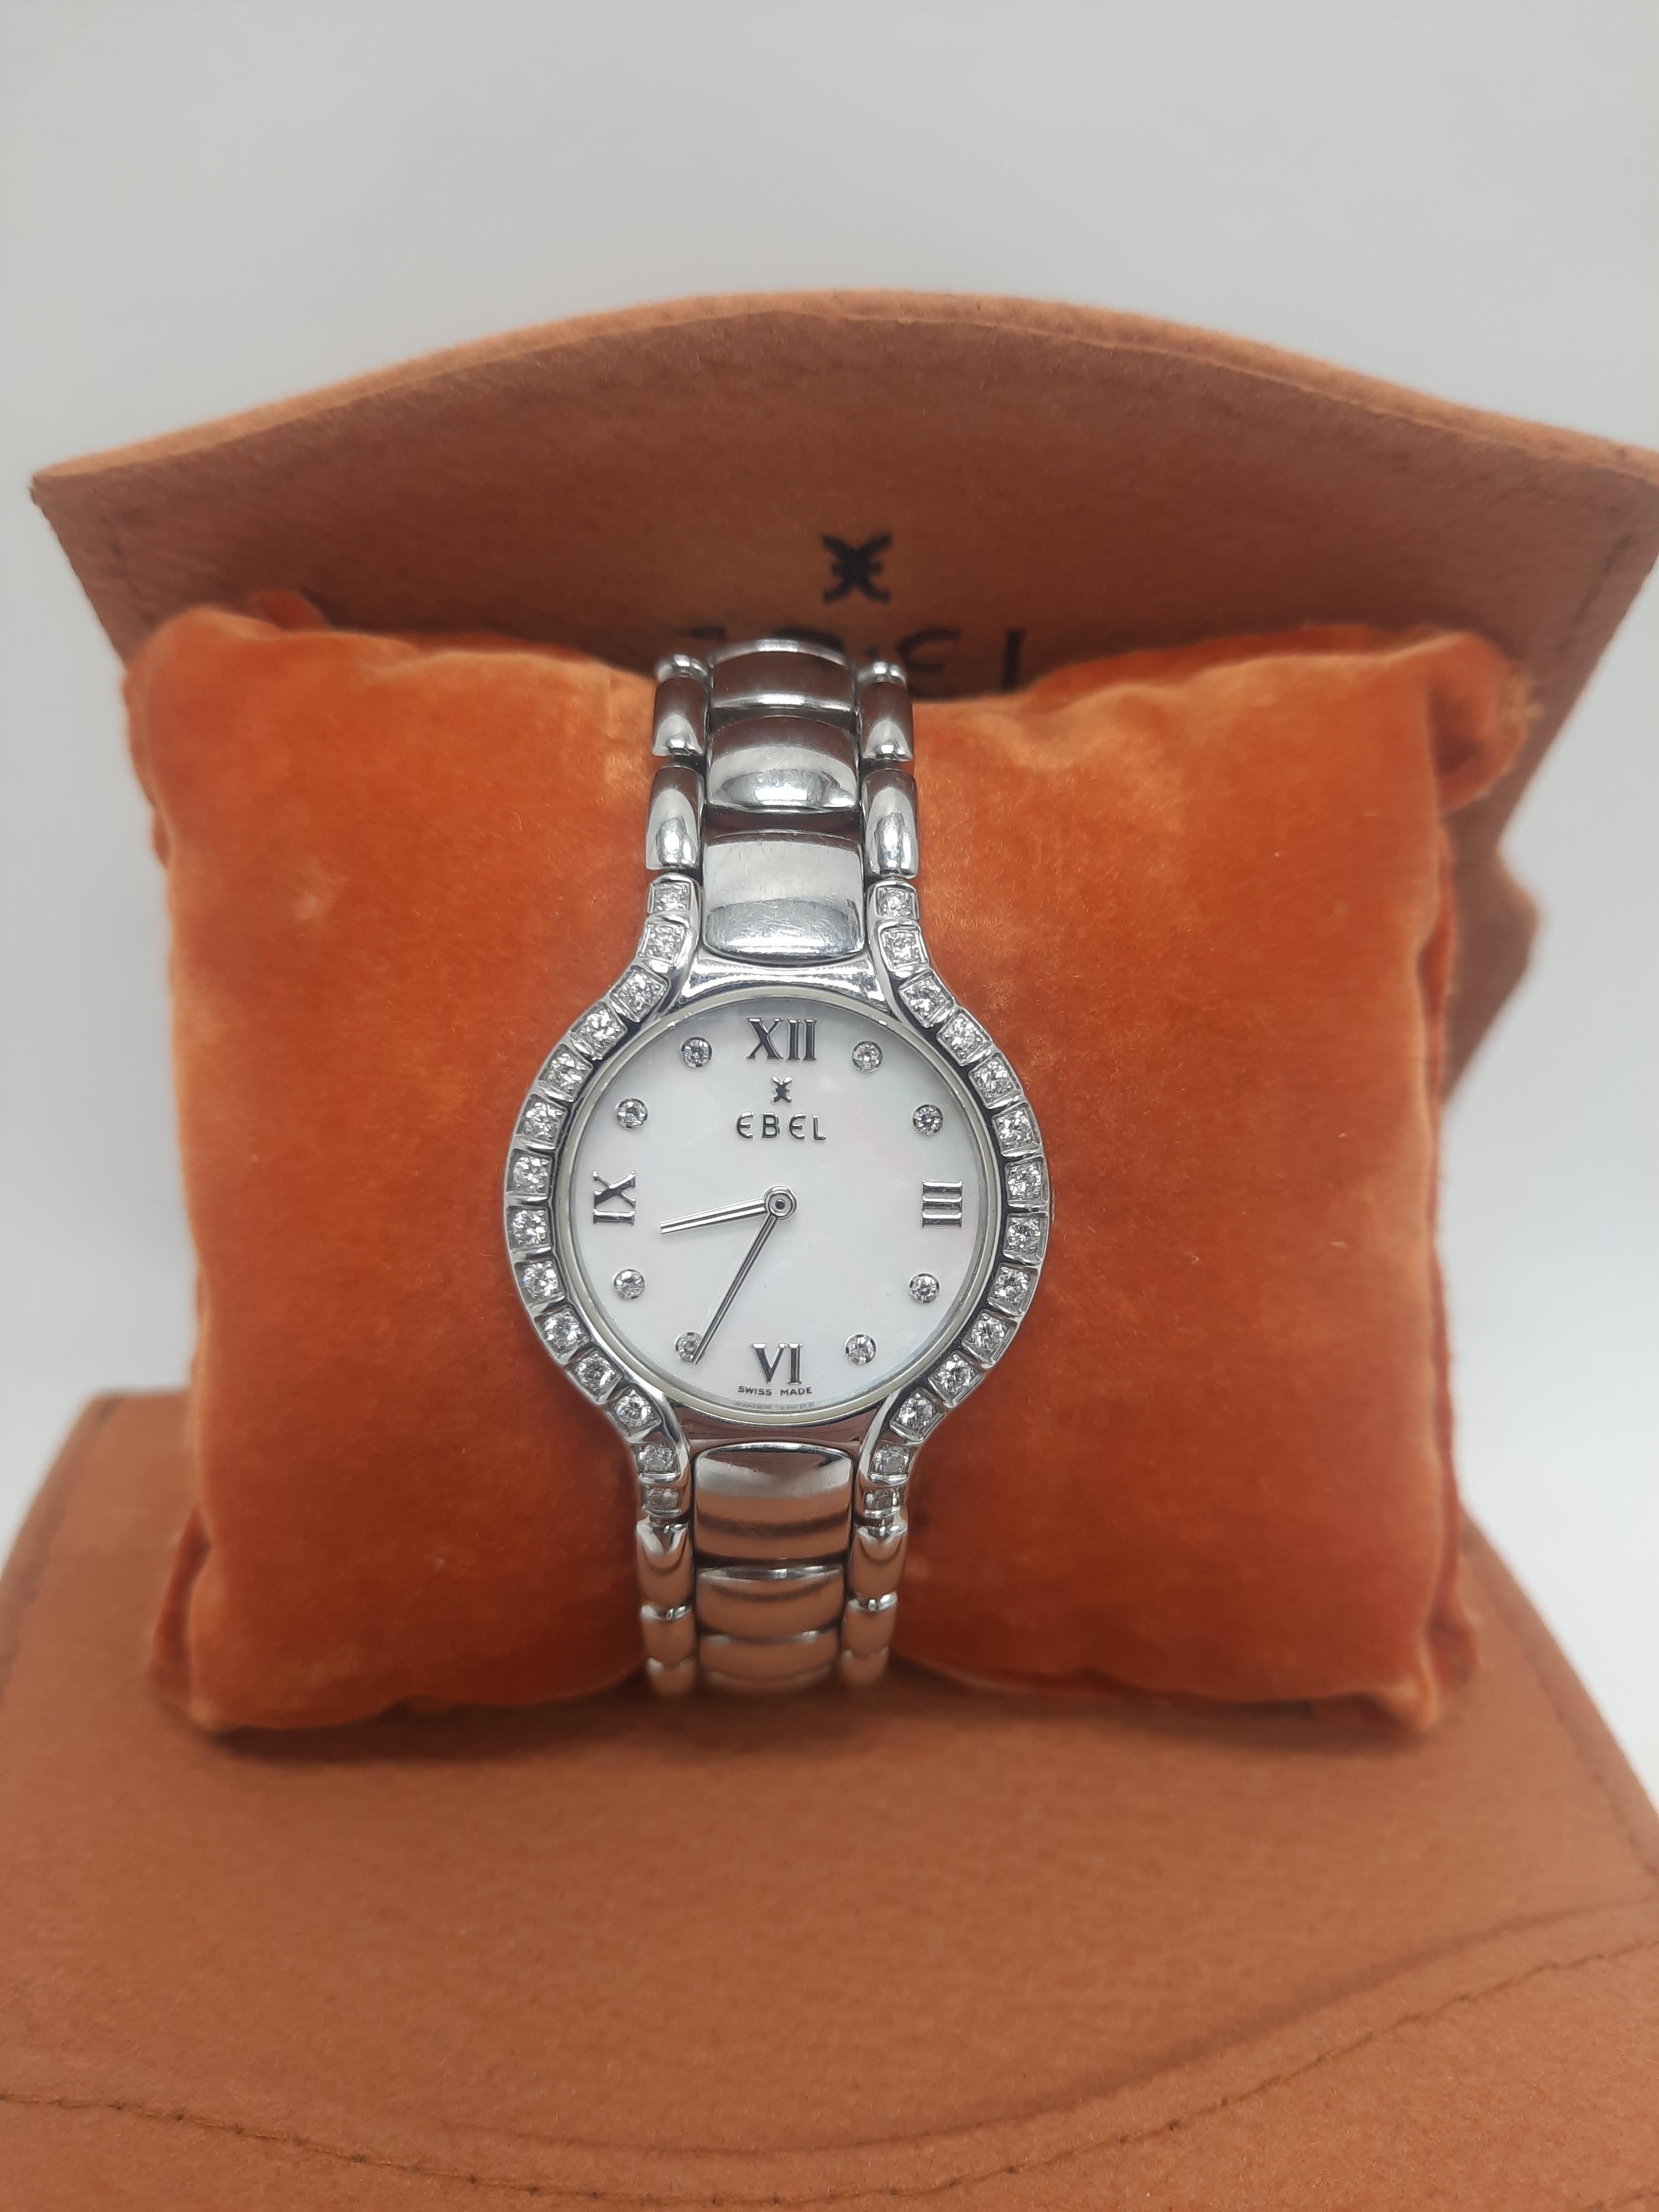 EPEL LADIES MOTHER OF PEARL STAINLESS STEEL WATCH WITH DIAMOND BEZEL